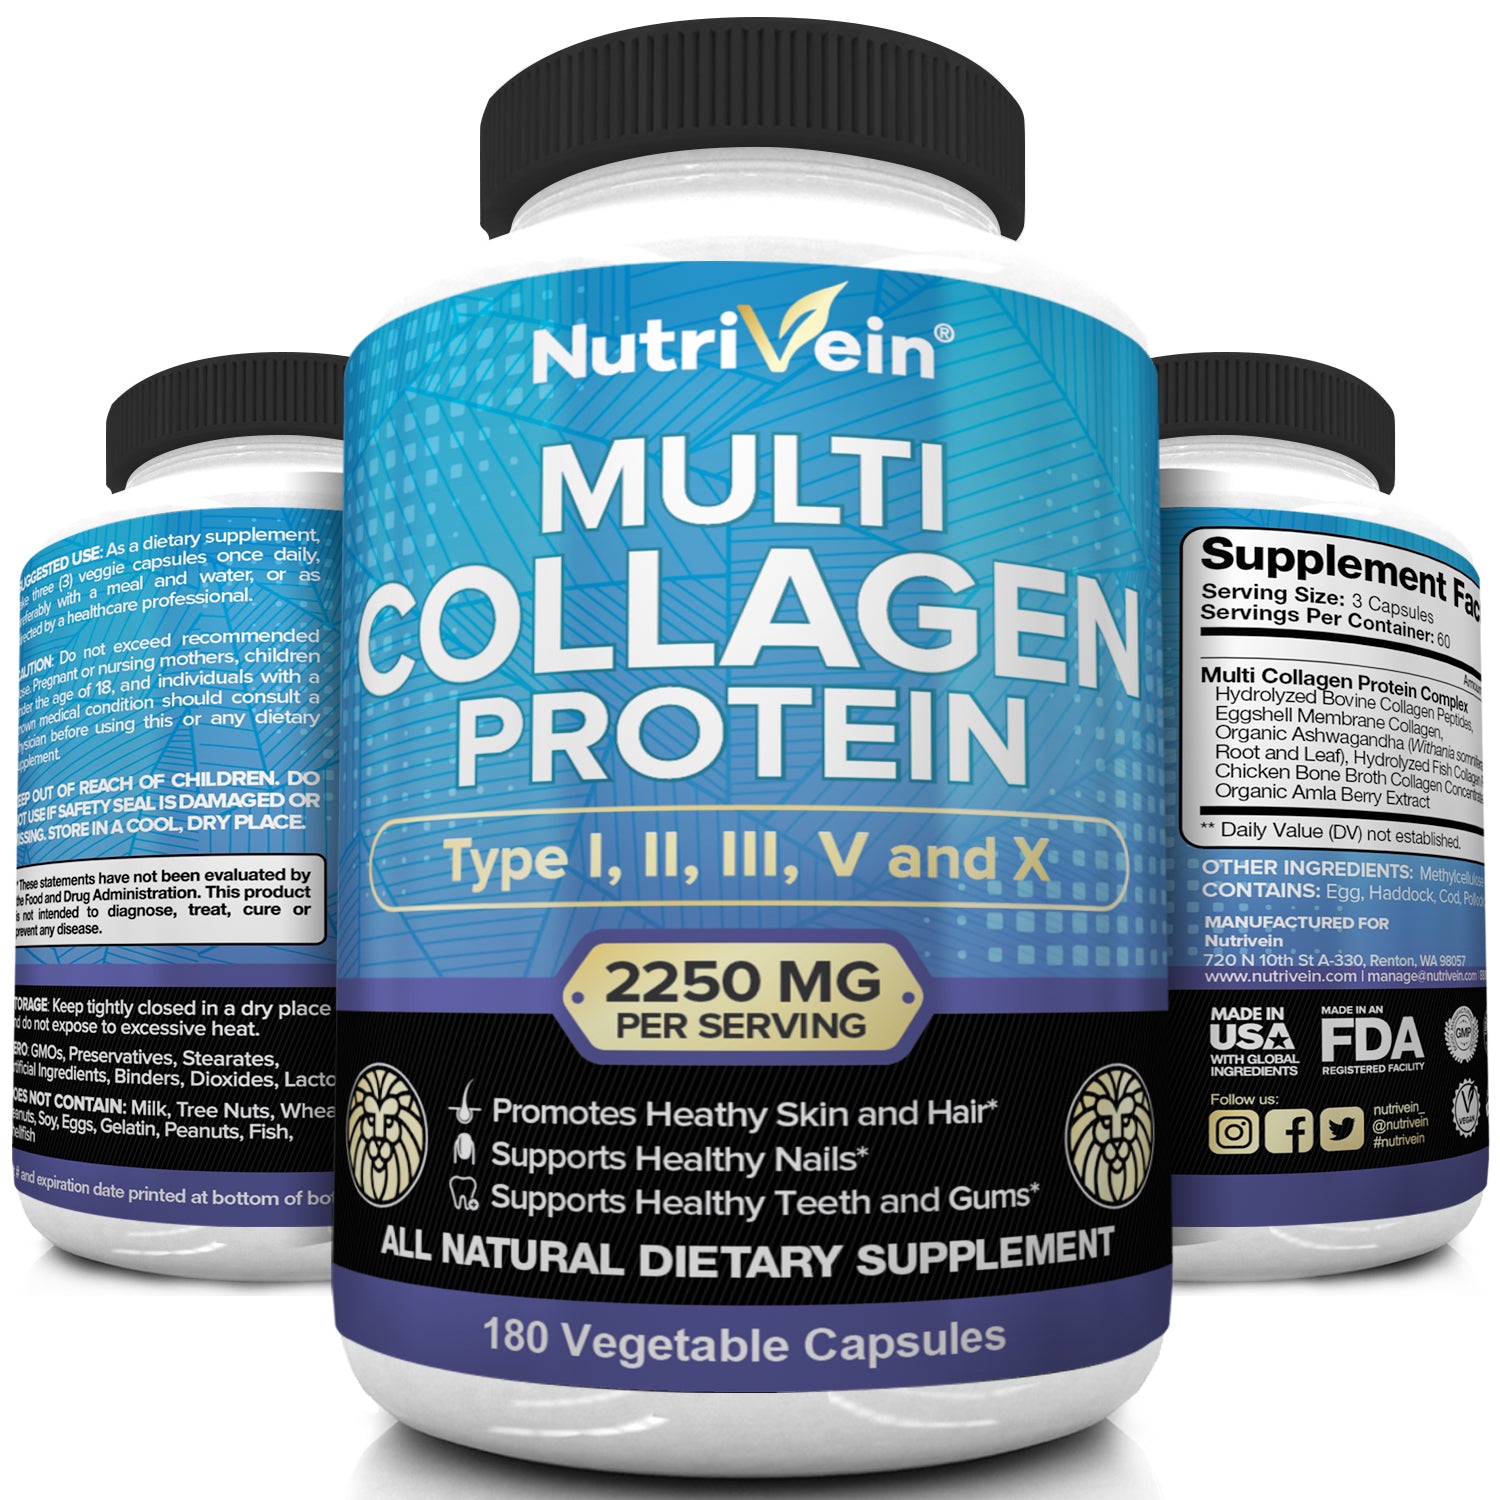 Protein capsules for vegetarians